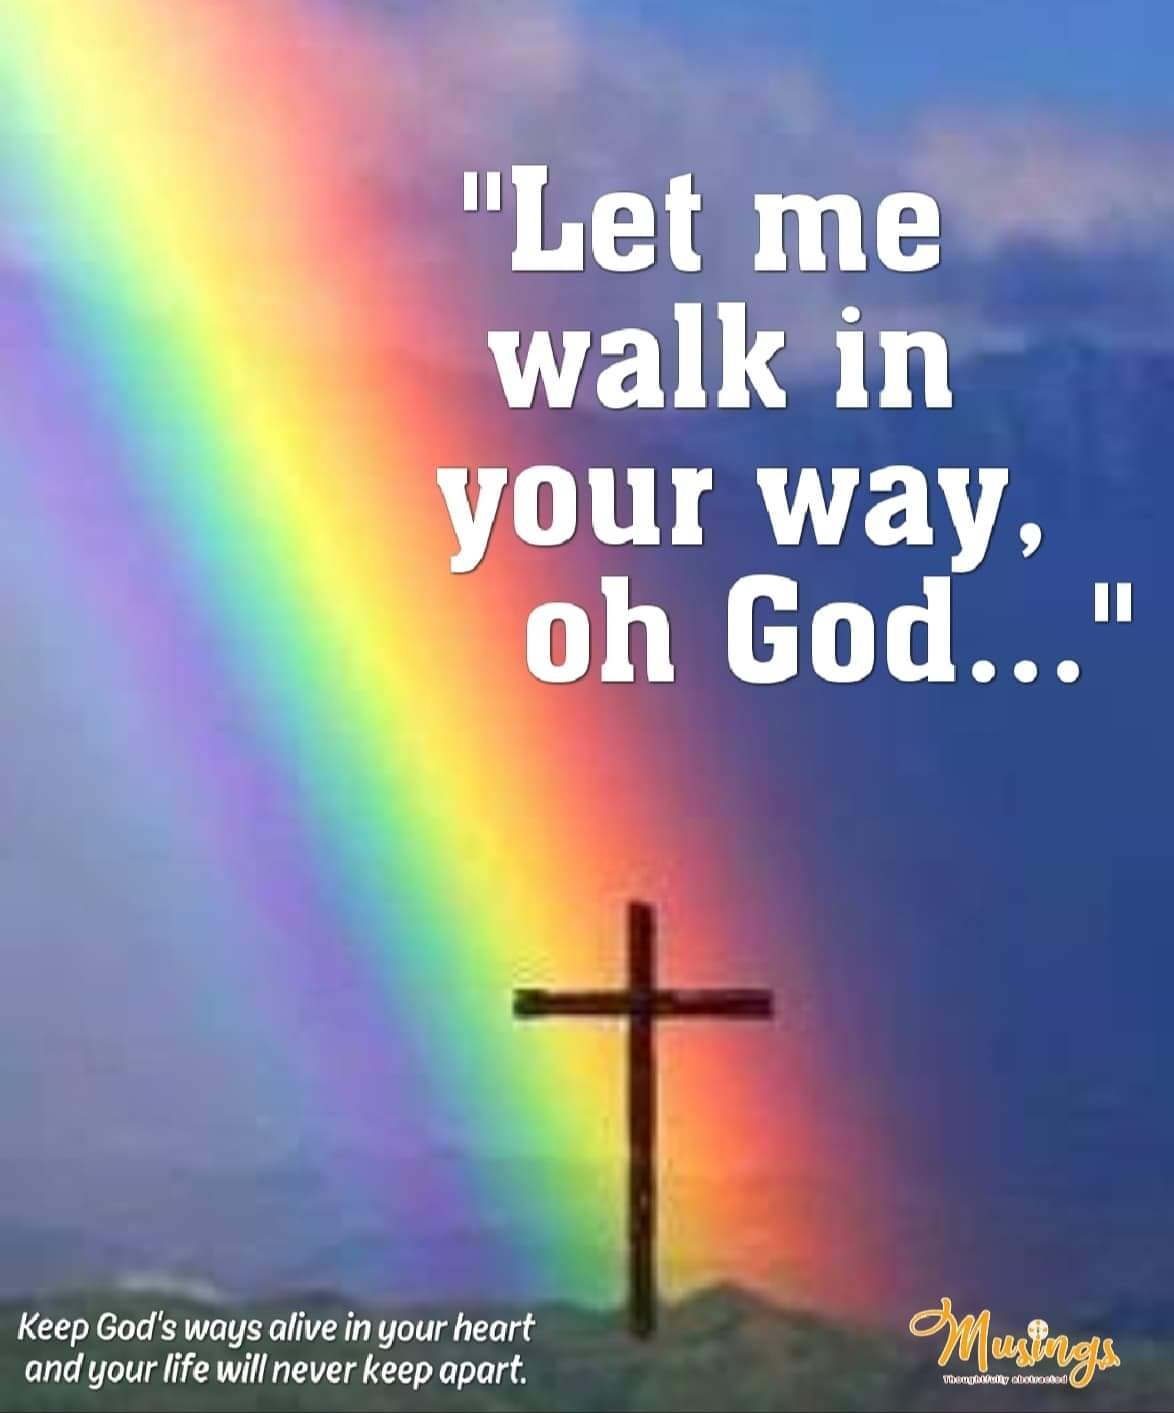 "Let me walk in your way, oh Lord..."